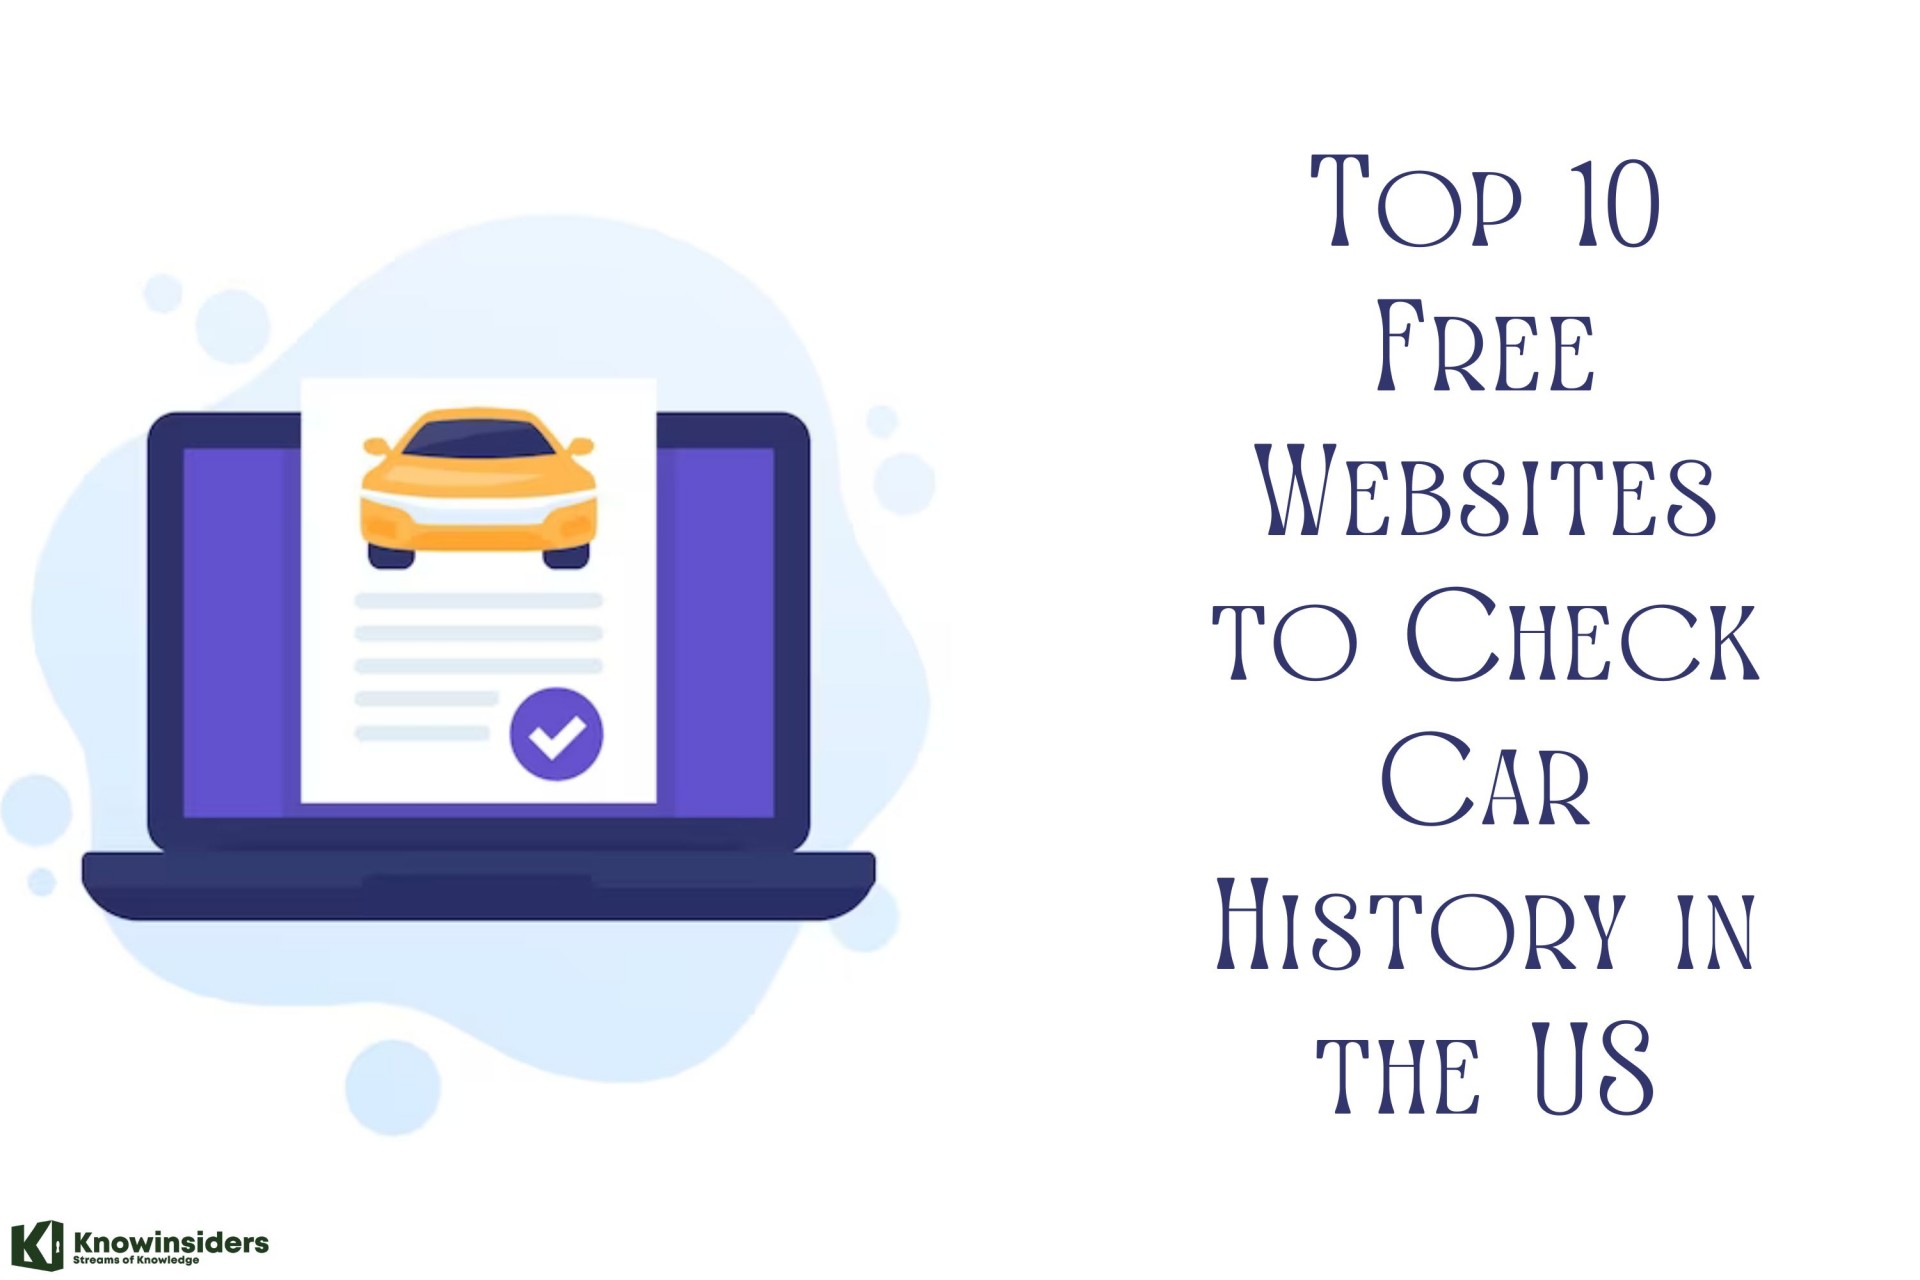 Top 10 Free Websites to Check Car History in the US